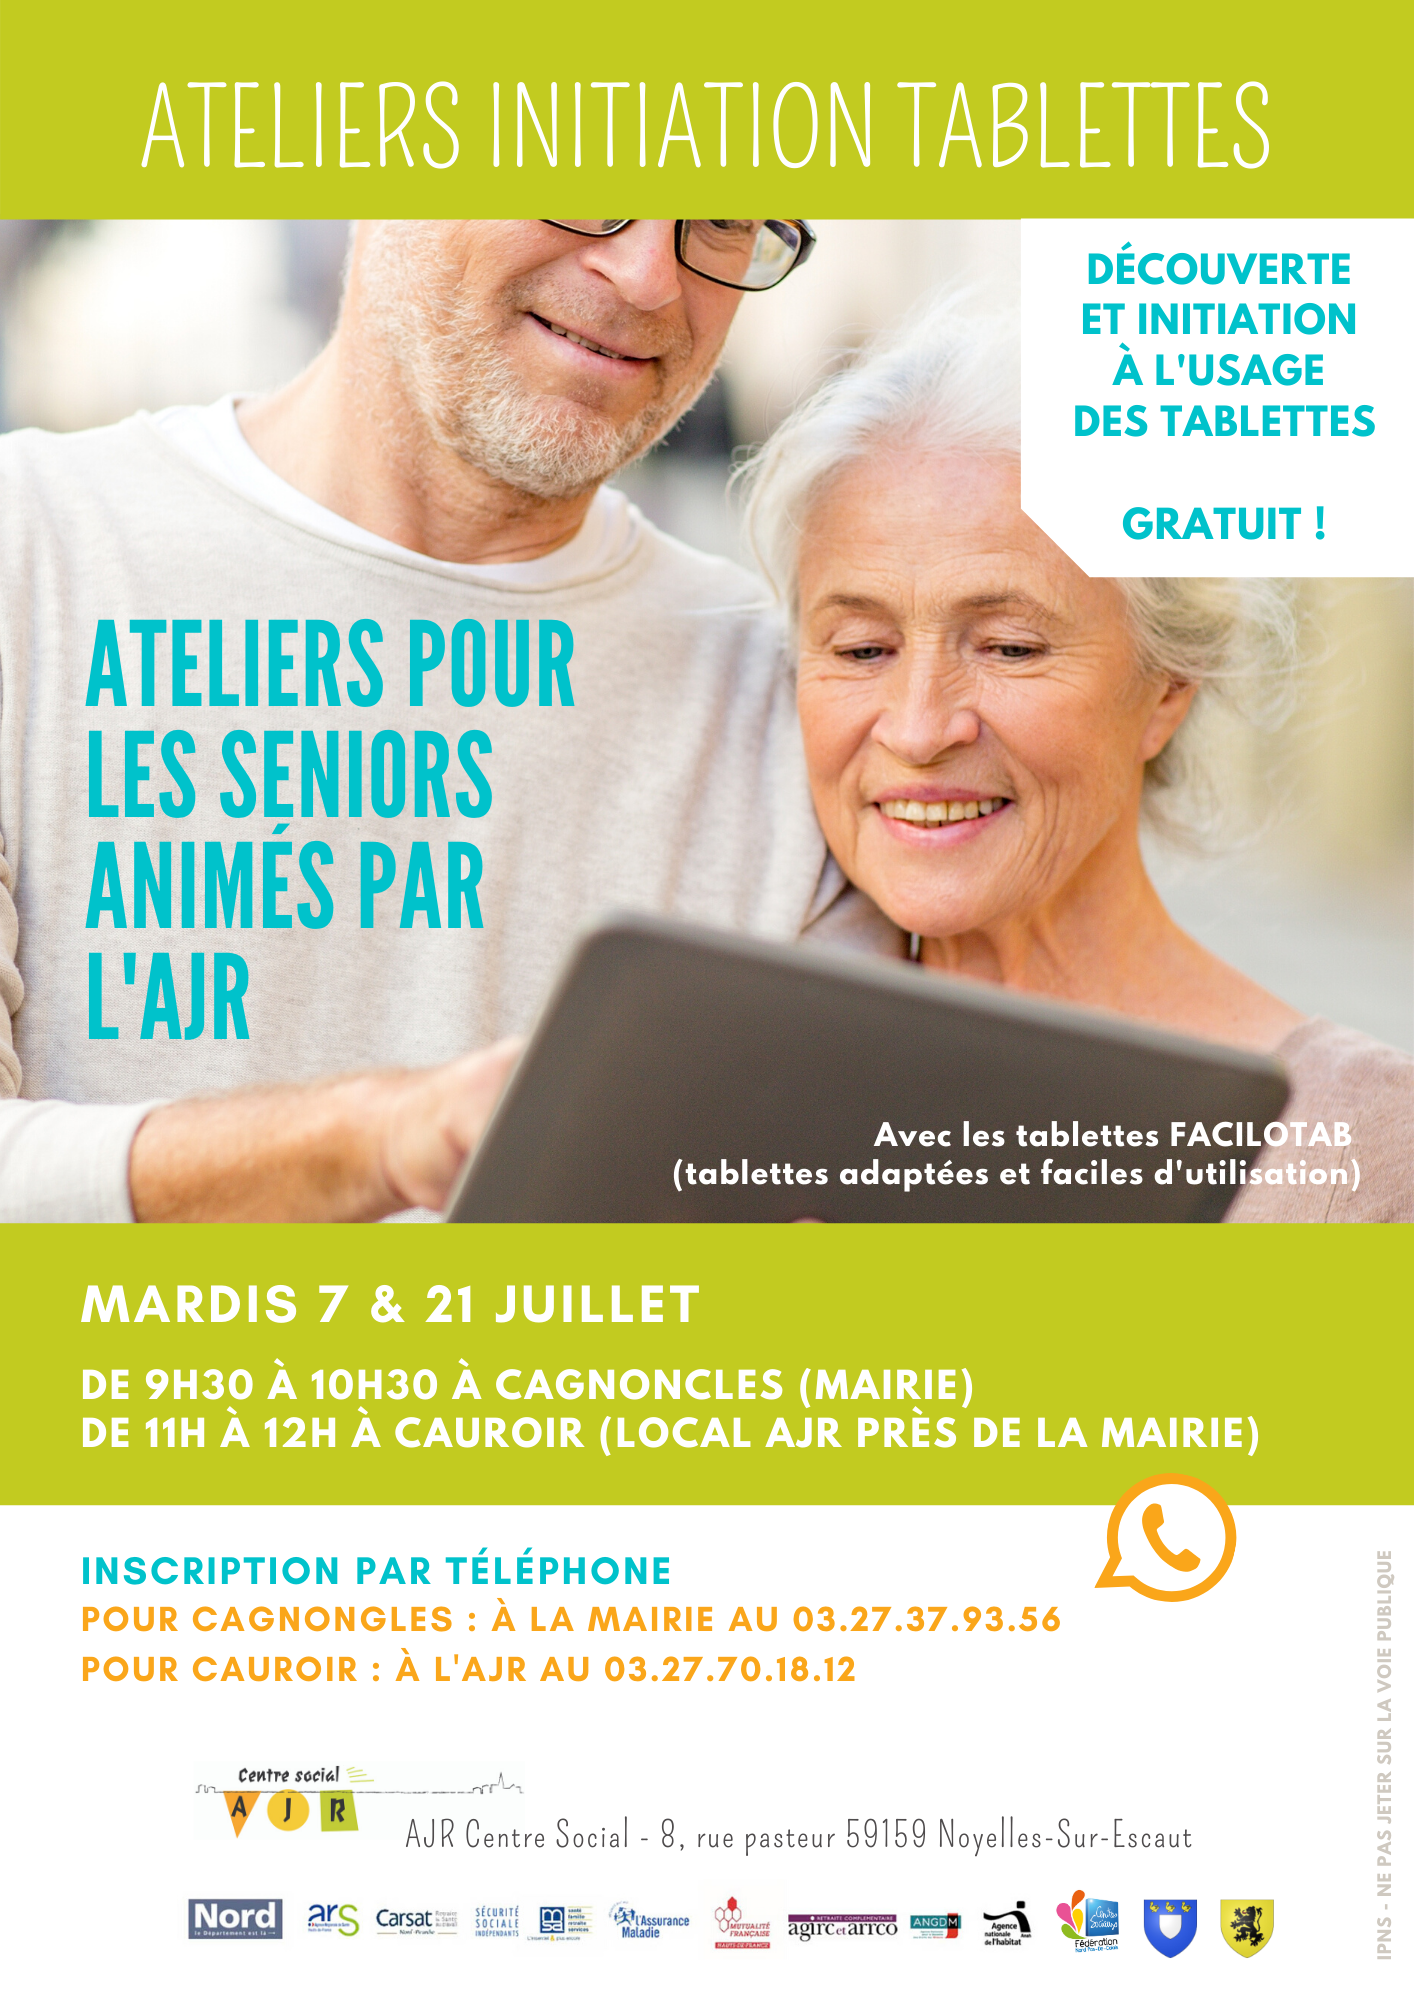 ateliers initiation tablettes